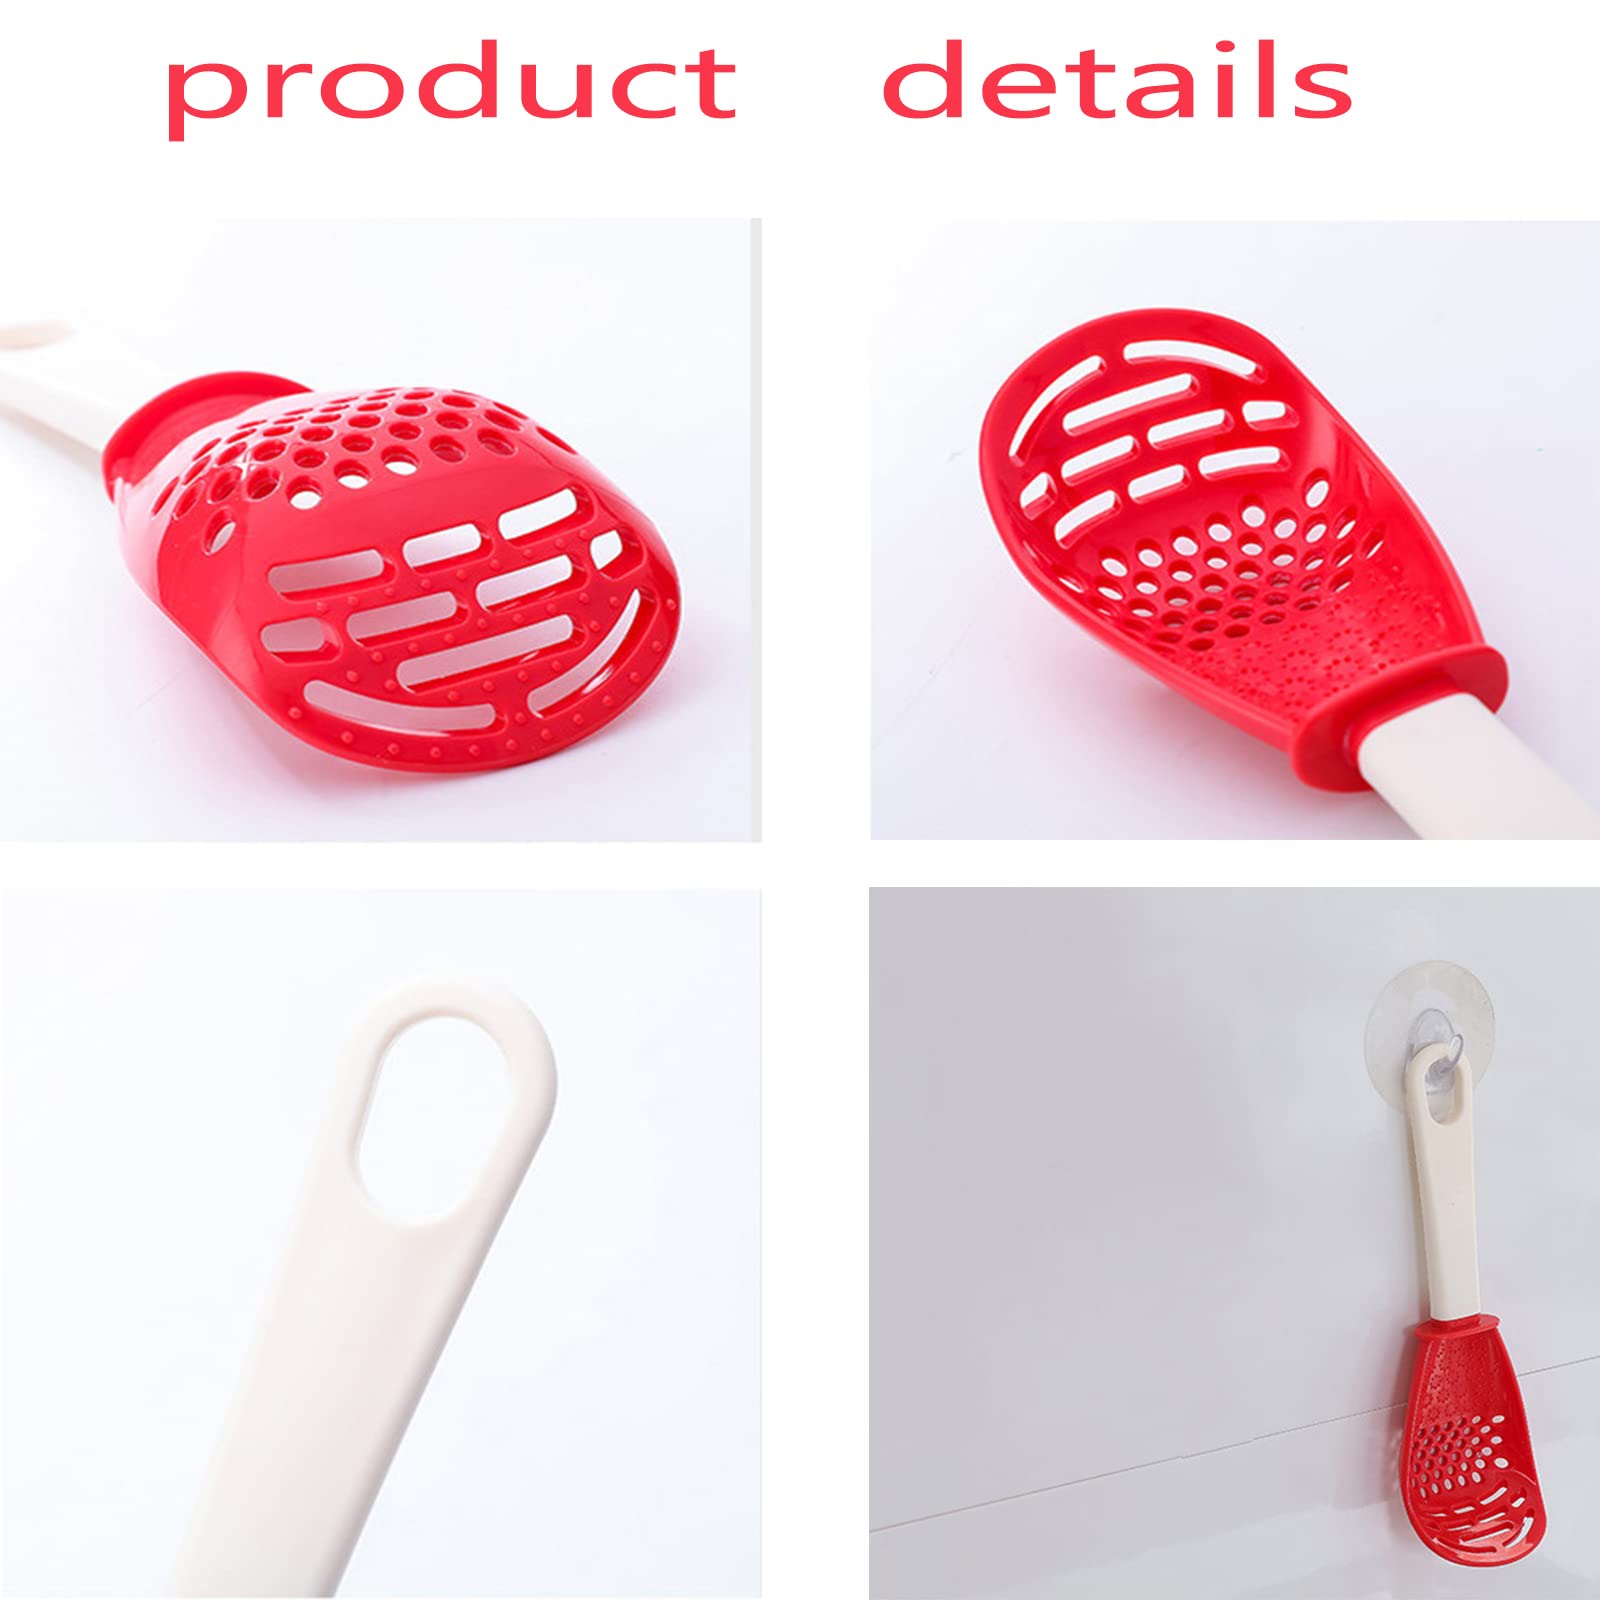 Xesakesi 4 PCS Multifunctional Cooking Spoon, All Purpose Kitchen Tool Skimmer Scoop Colander Strainer Grater Masher, Food-Grade High Temperature Resistant Cooking Gadgets, Plastic (2Red+2Black)